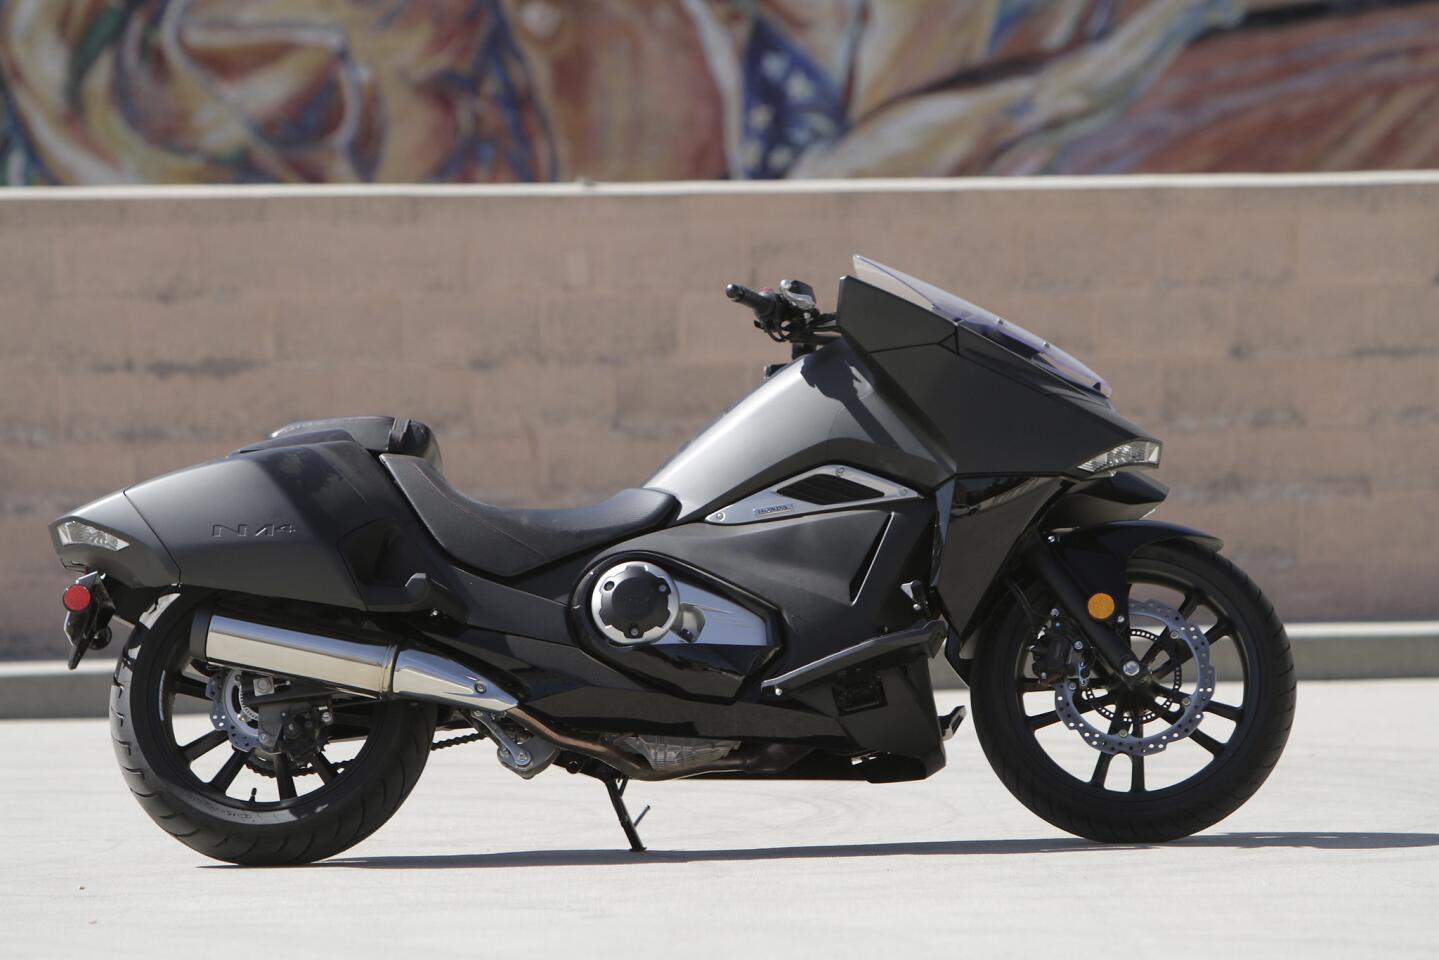 The NM4 is a sleek, low, easy-to-ride street cruiser.